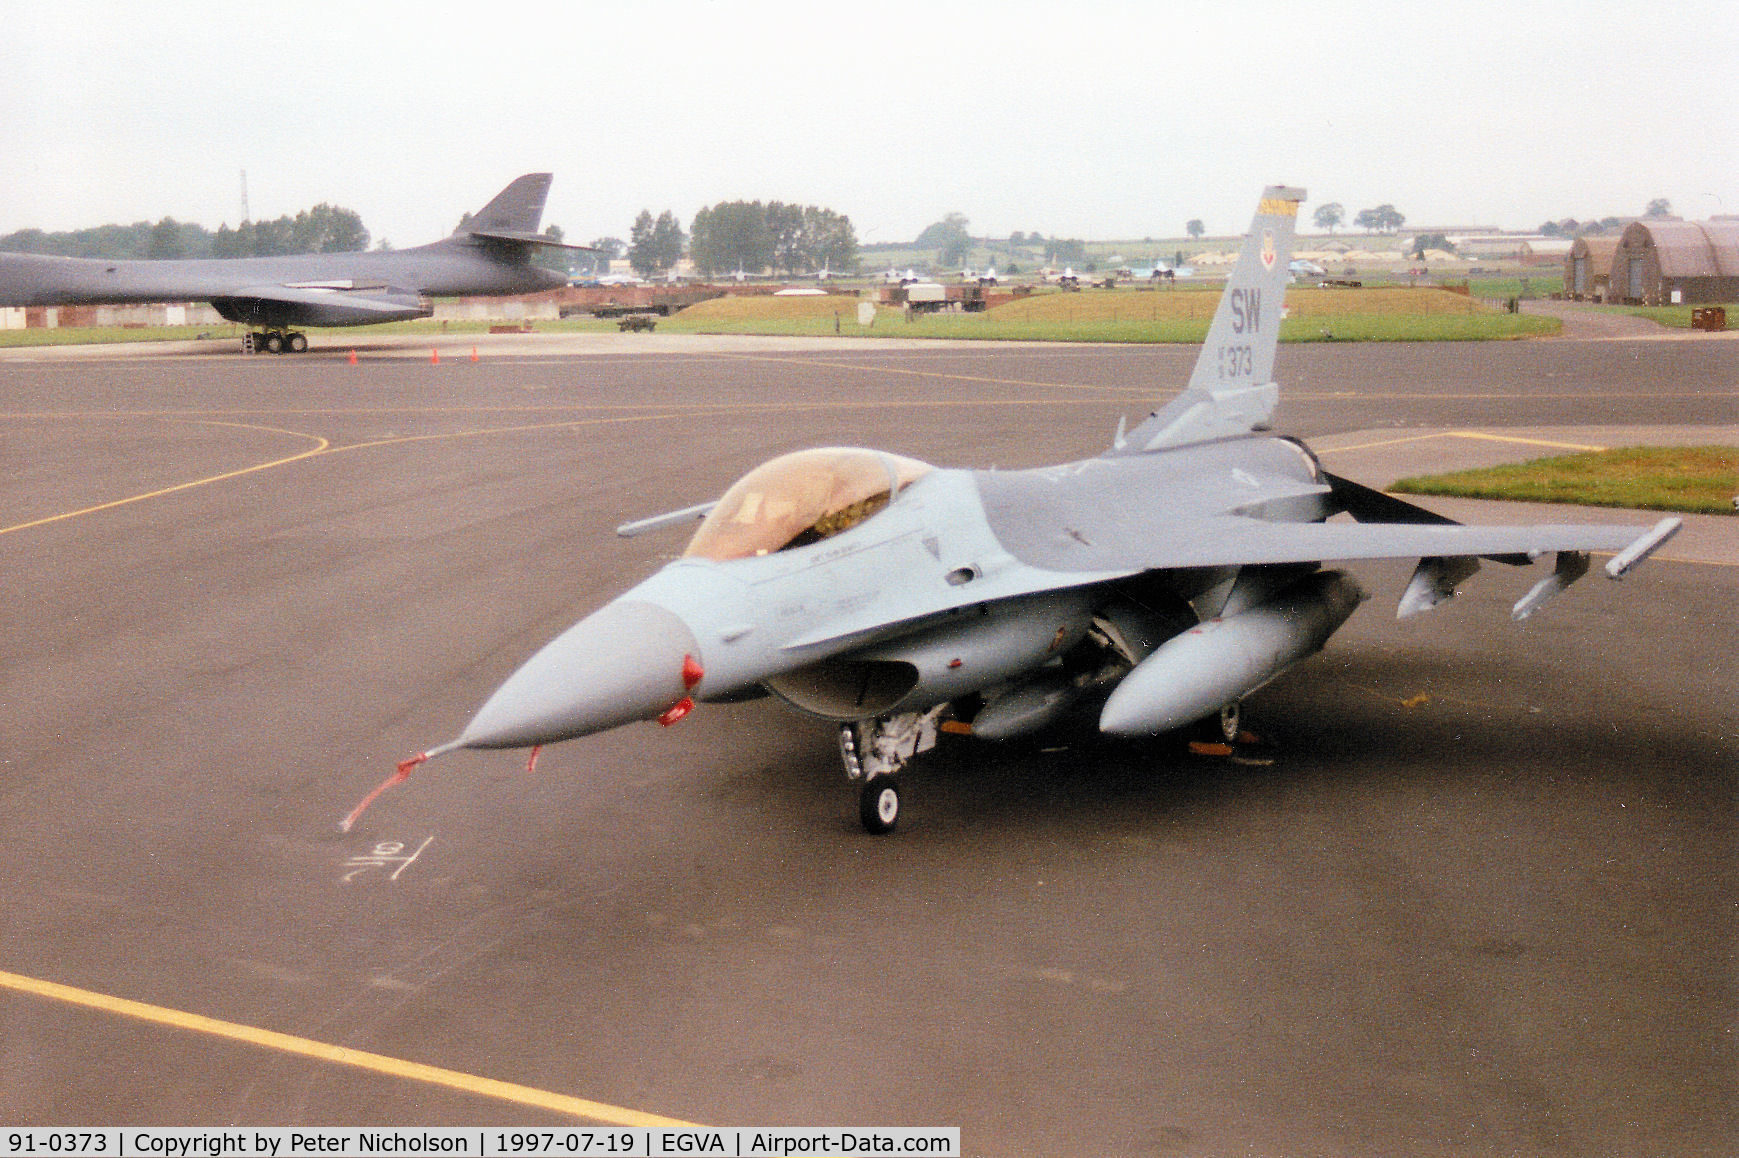 91-0373, 1991 General Dynamics F-16C Fighting Falcon C/N CC-71, Another view of Trend 64, an F-16C Falcon of 20th Fighter Wing at Shaw AFB on the flight-line at the 1997 Intnl Air Tattoo at RAF Fairford.